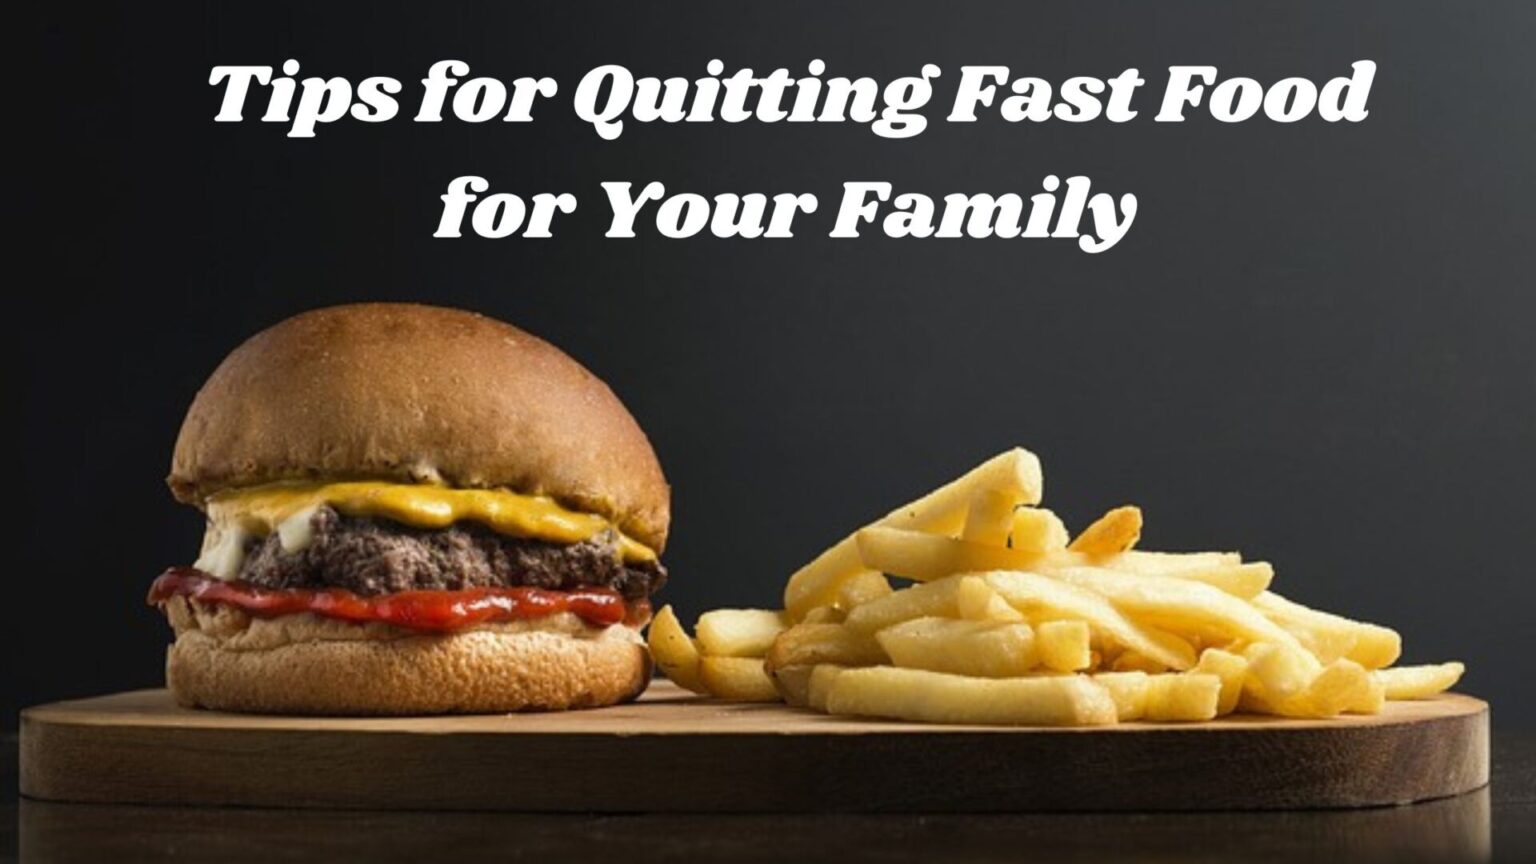 Tips for Quitting Fast Food for Your Family